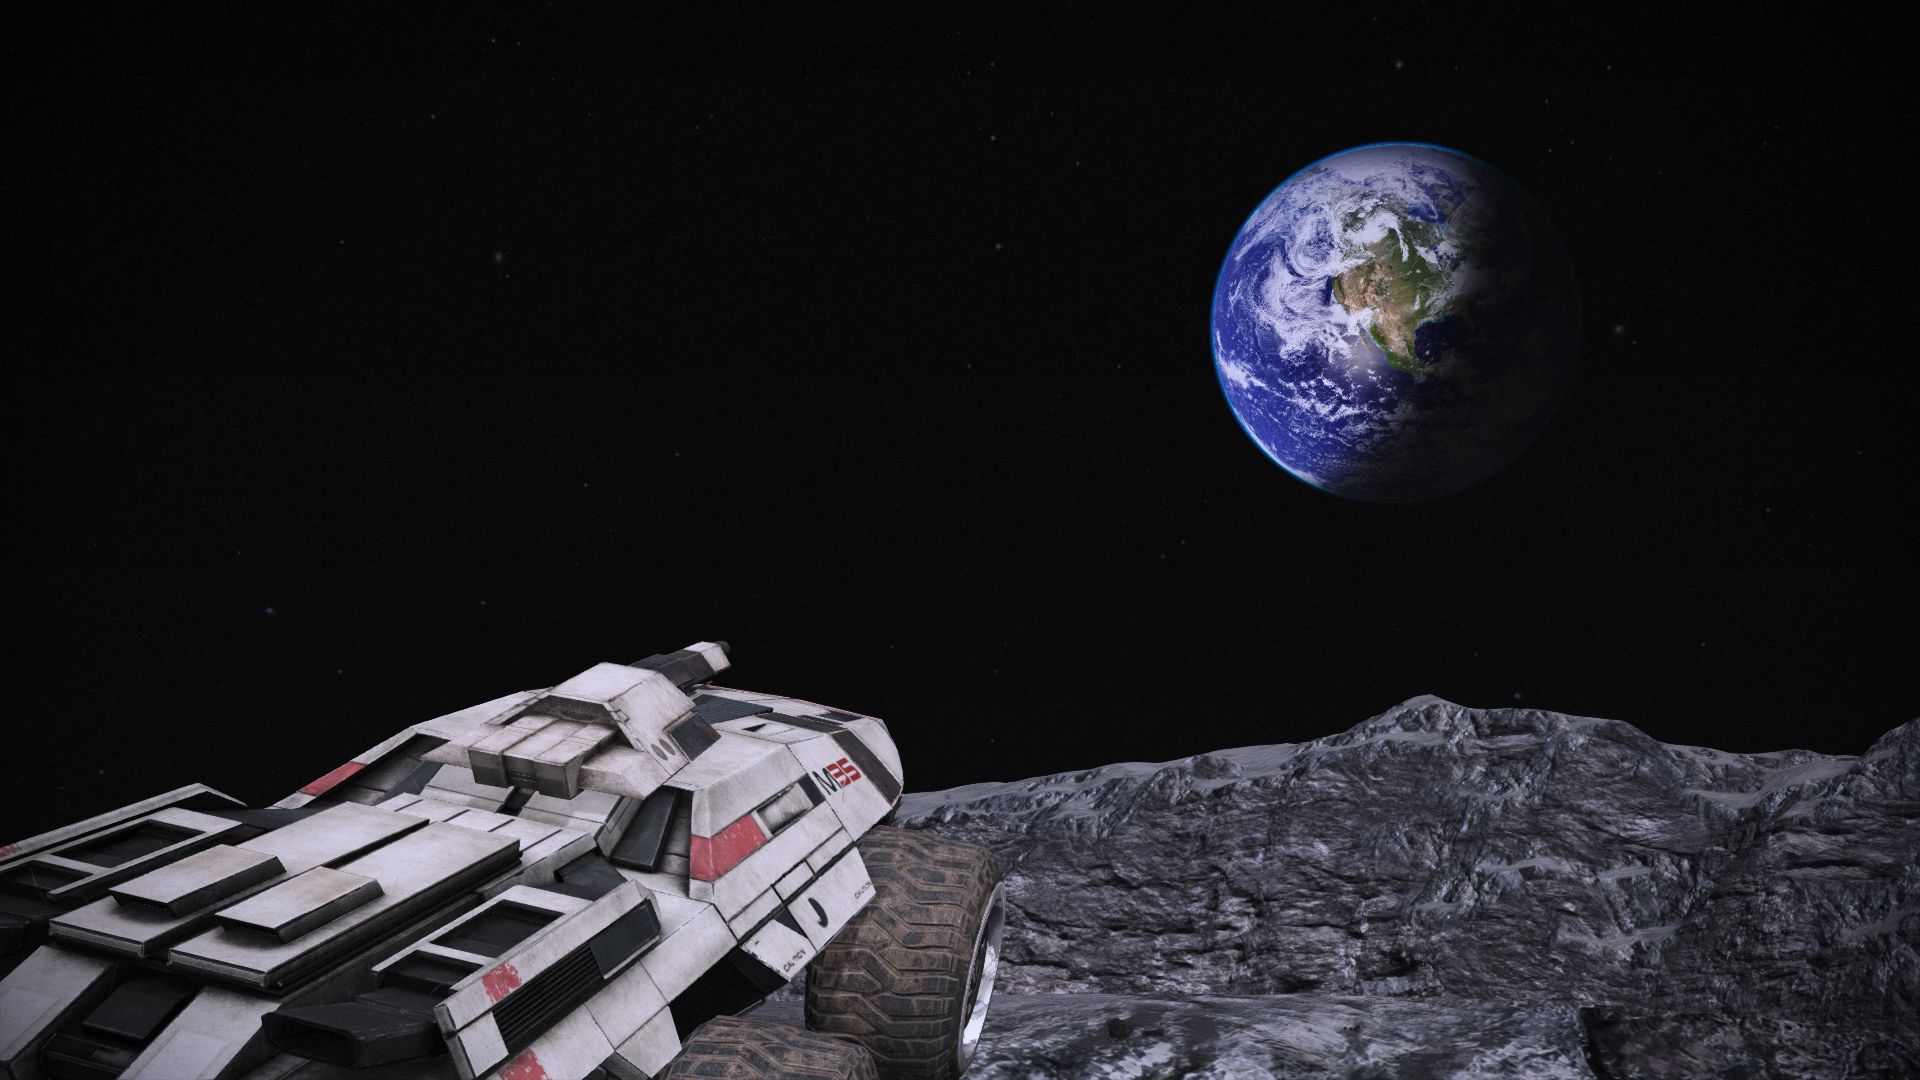 Earth as seen from the moon in Mass Effect Legendary Edition